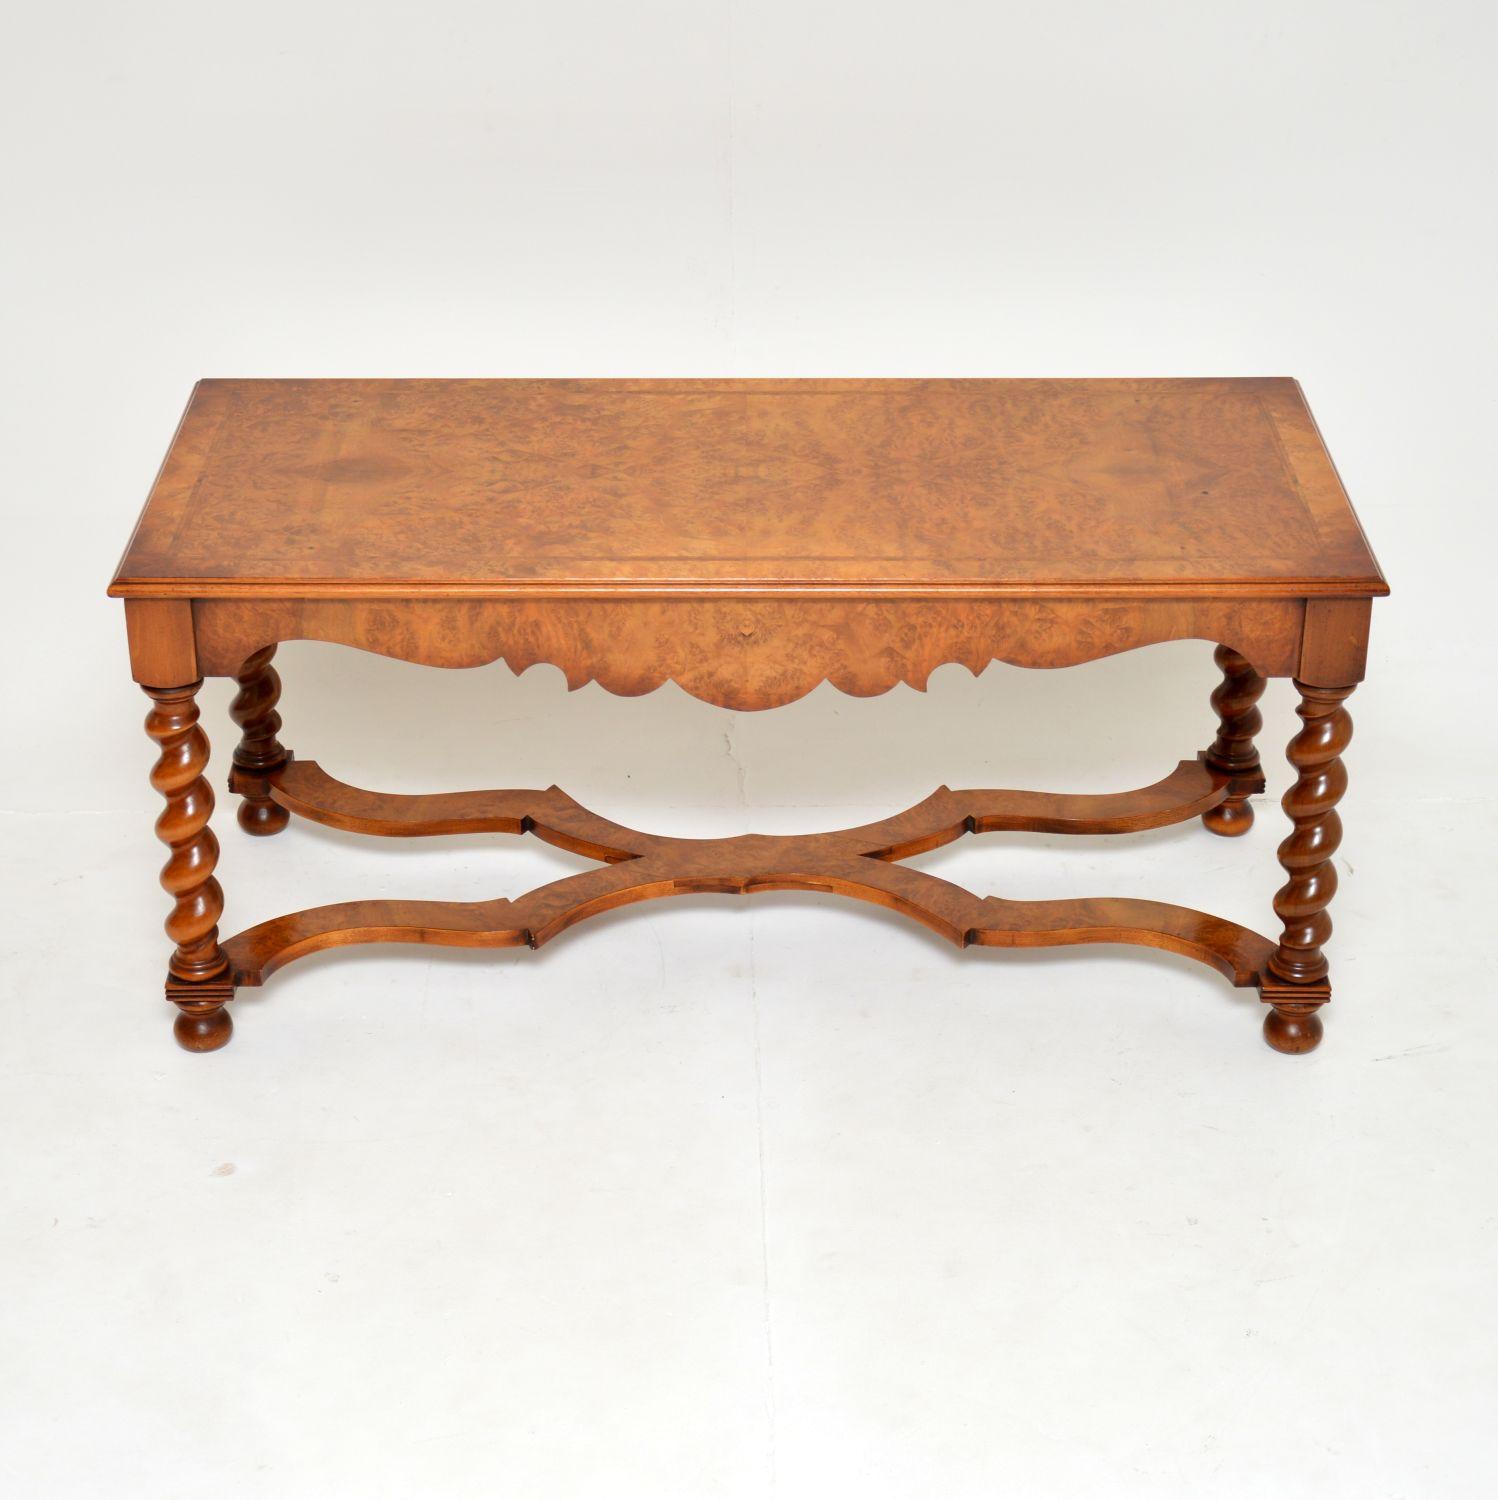 A large, beautiful and impressive antique William & Mary style coffee table in burr walnut. This was made in England, it dates from around the 1950’s.

The quality is amazing, with gorgeous barley twist legs and a beautifully shaped stretchered